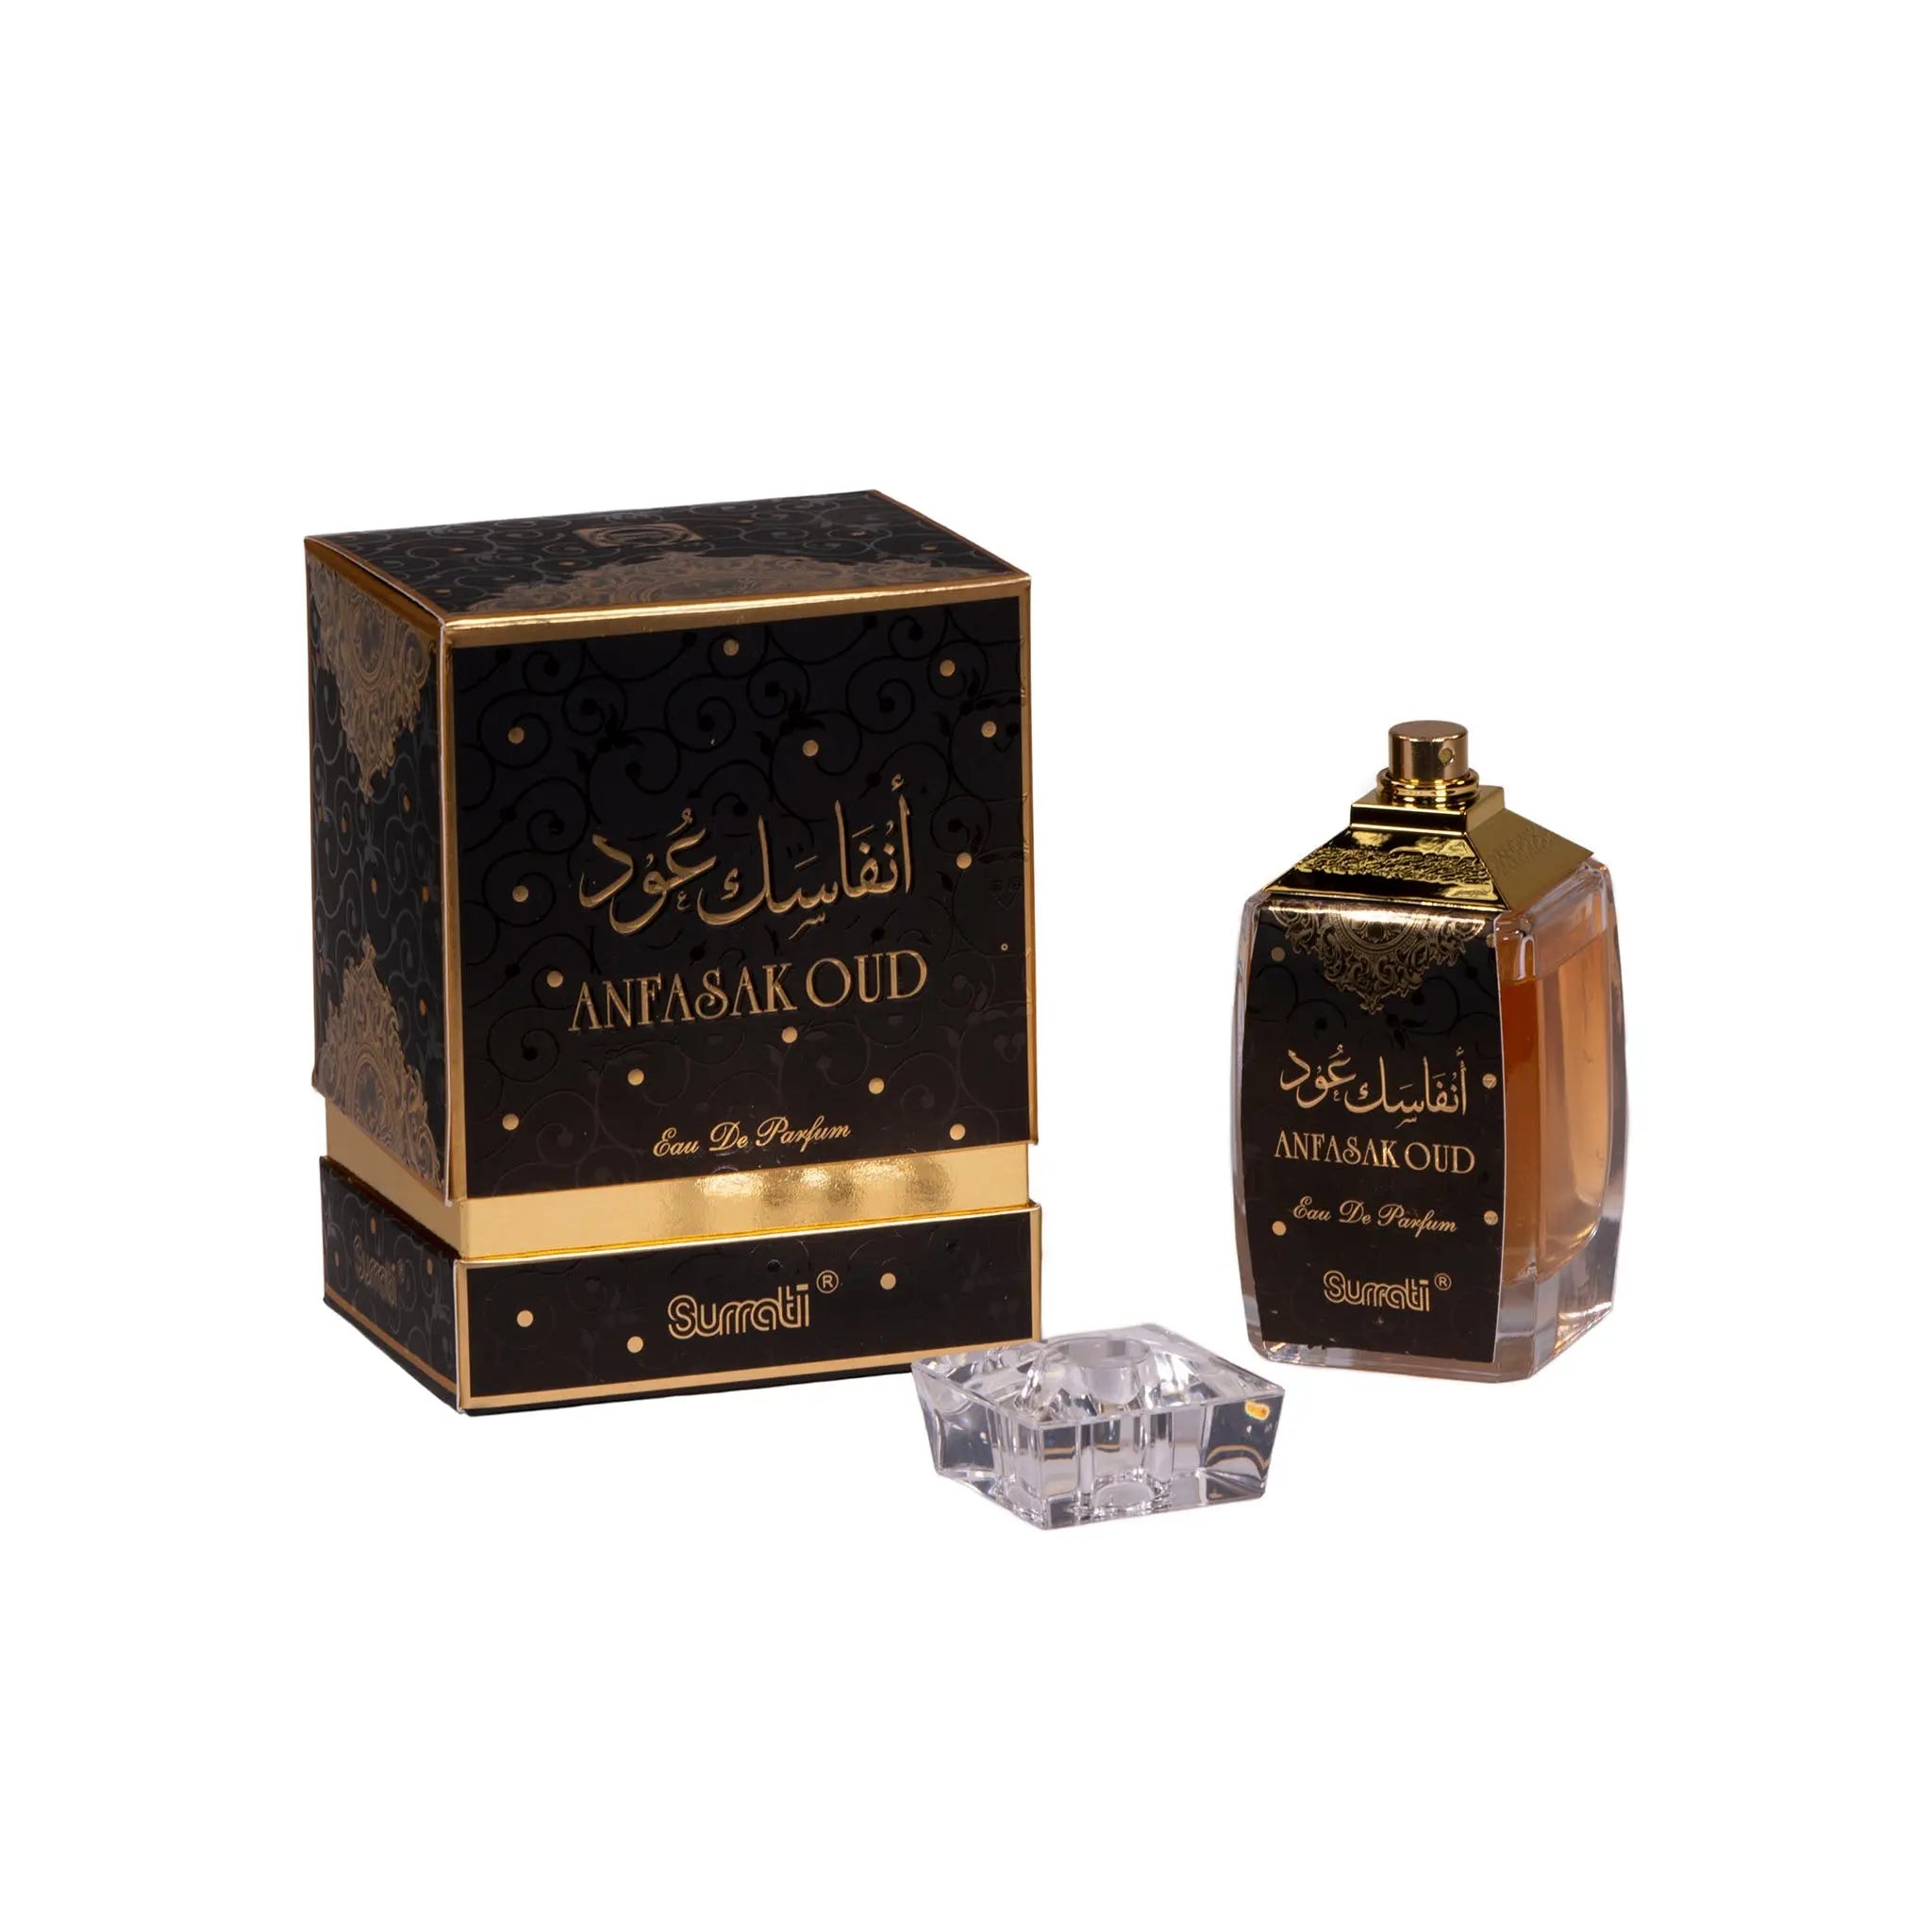 This image displays a perfume bottle with its cap removed, placed beside its packaging box. The box has a black base with an intricate gold paisley and swirl pattern, and it features the name "ANFASAK OUD" in both Arabic and English lettering in gold, indicating a fragrance related to the traditional Oud scent. Below this, also in gold, is the text "Eau De Parfum" and the brand "Surrati." The bottle mirrors the design of the box, with a label that matches the box's pattern and text.